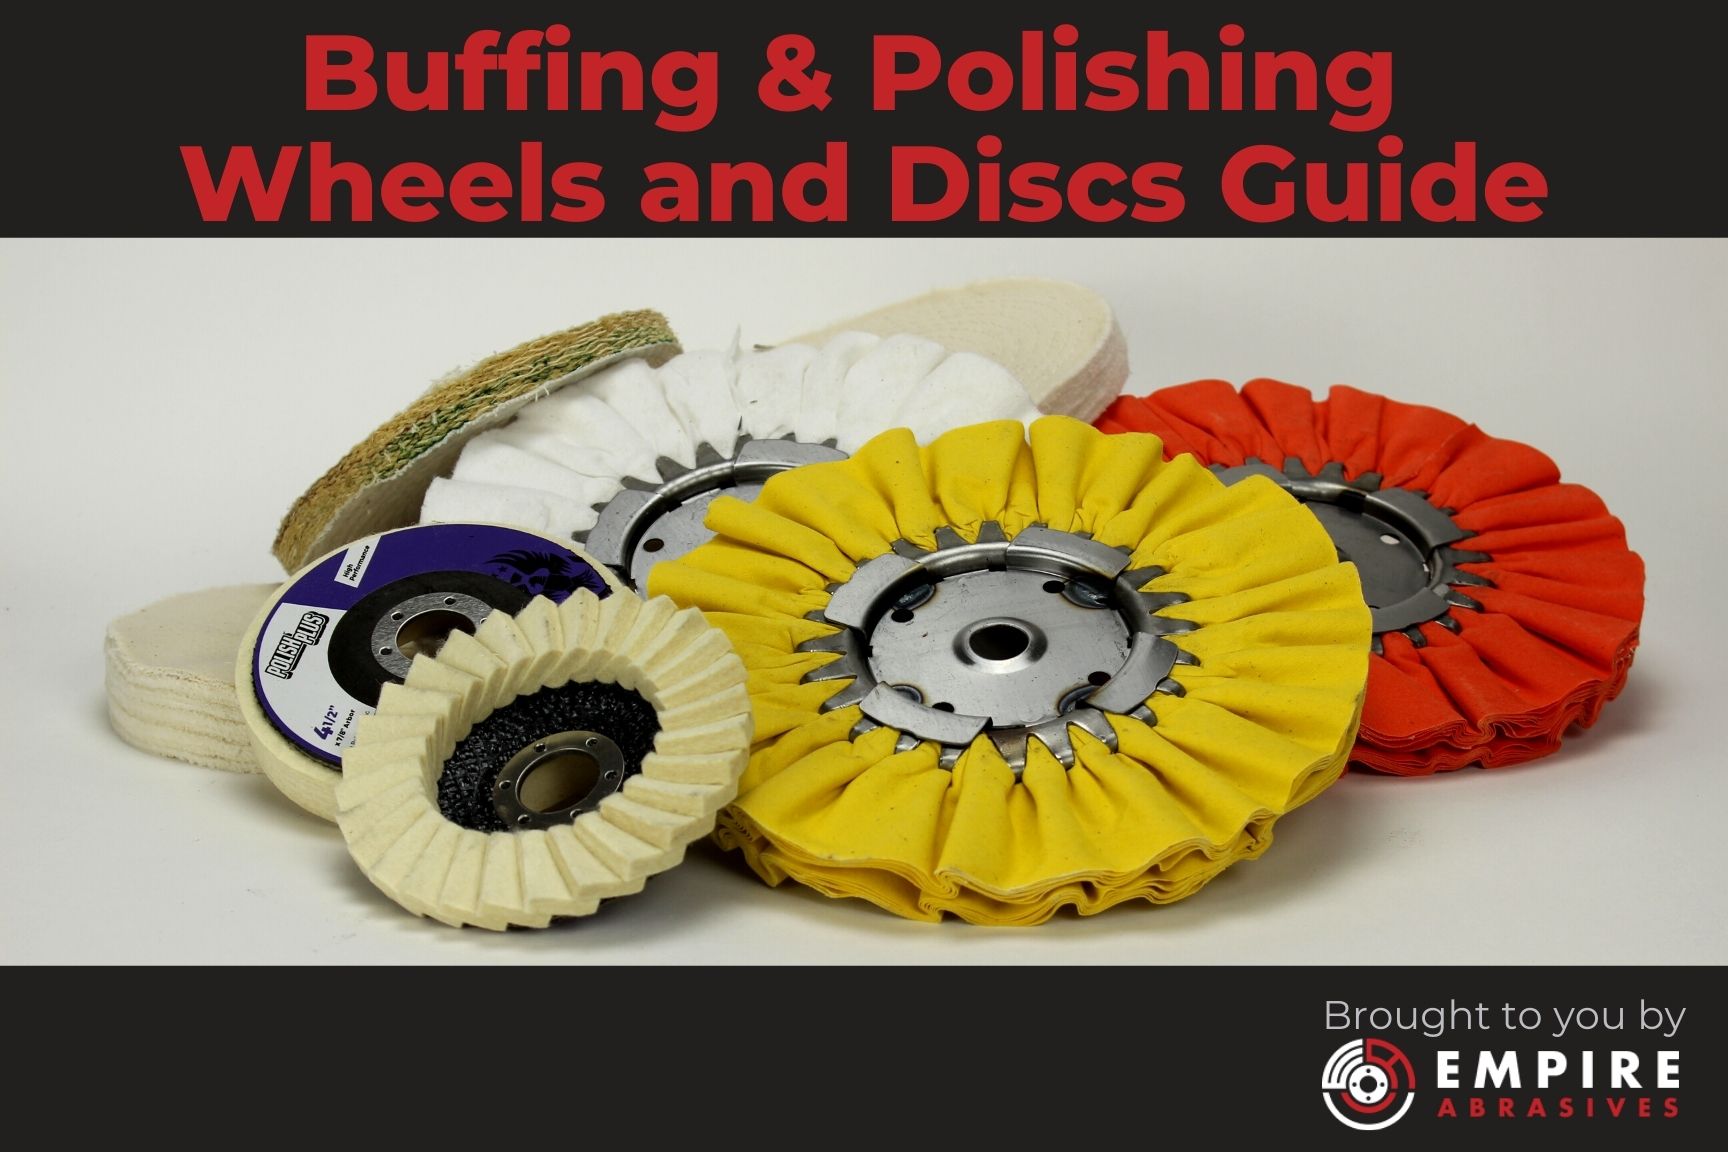 Buffing & Polishing Wheels and Discs Differences